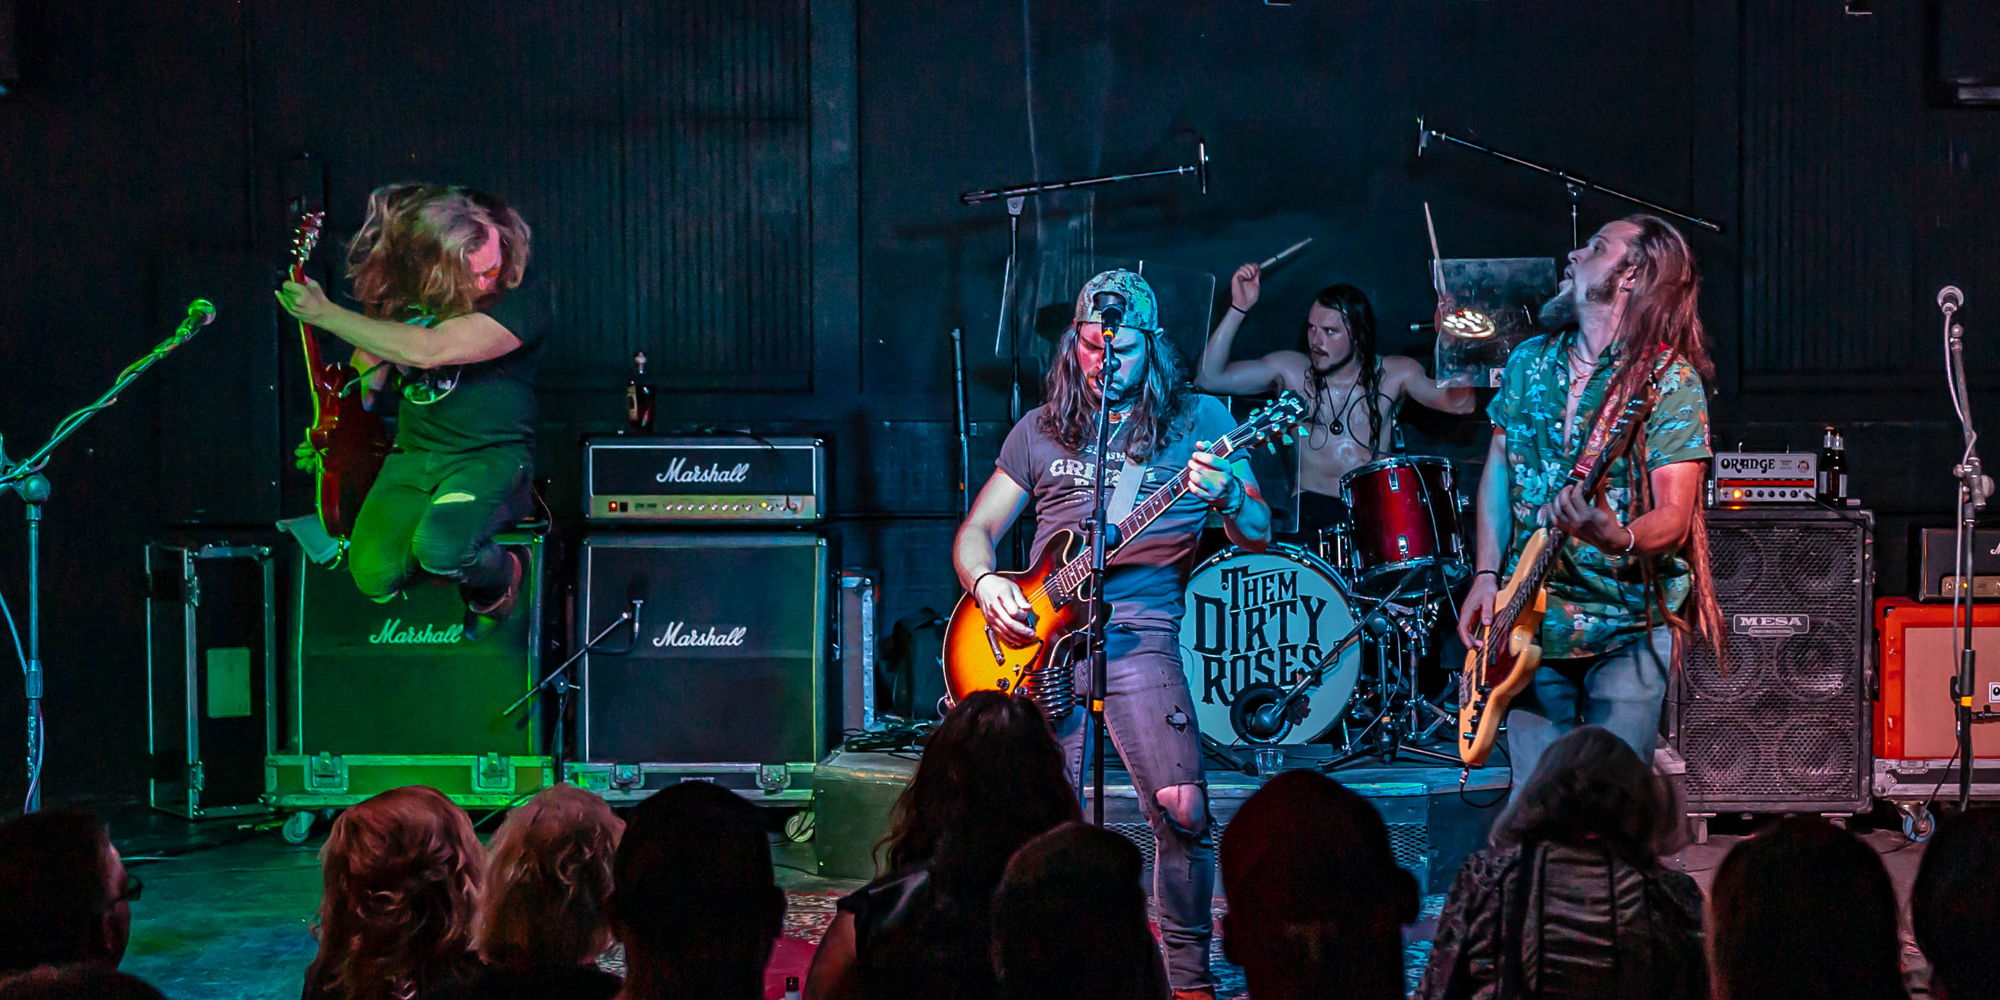 Them Dirty Roses Live at Dosey Doe Big Barn promotional image